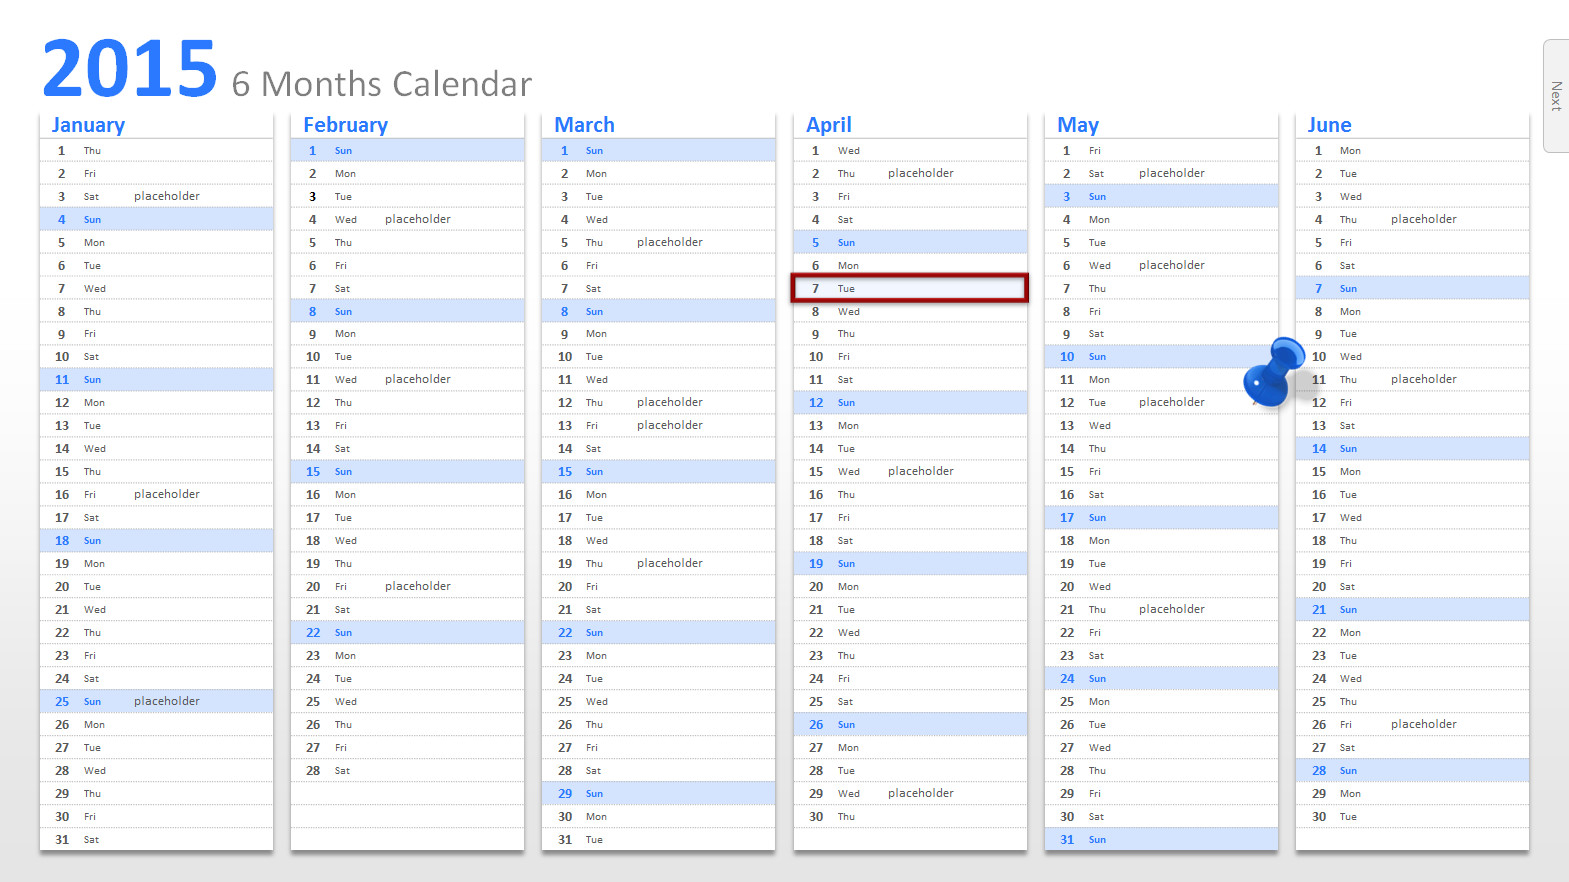 PowerPoint Calendar The Perfect Start for 2015